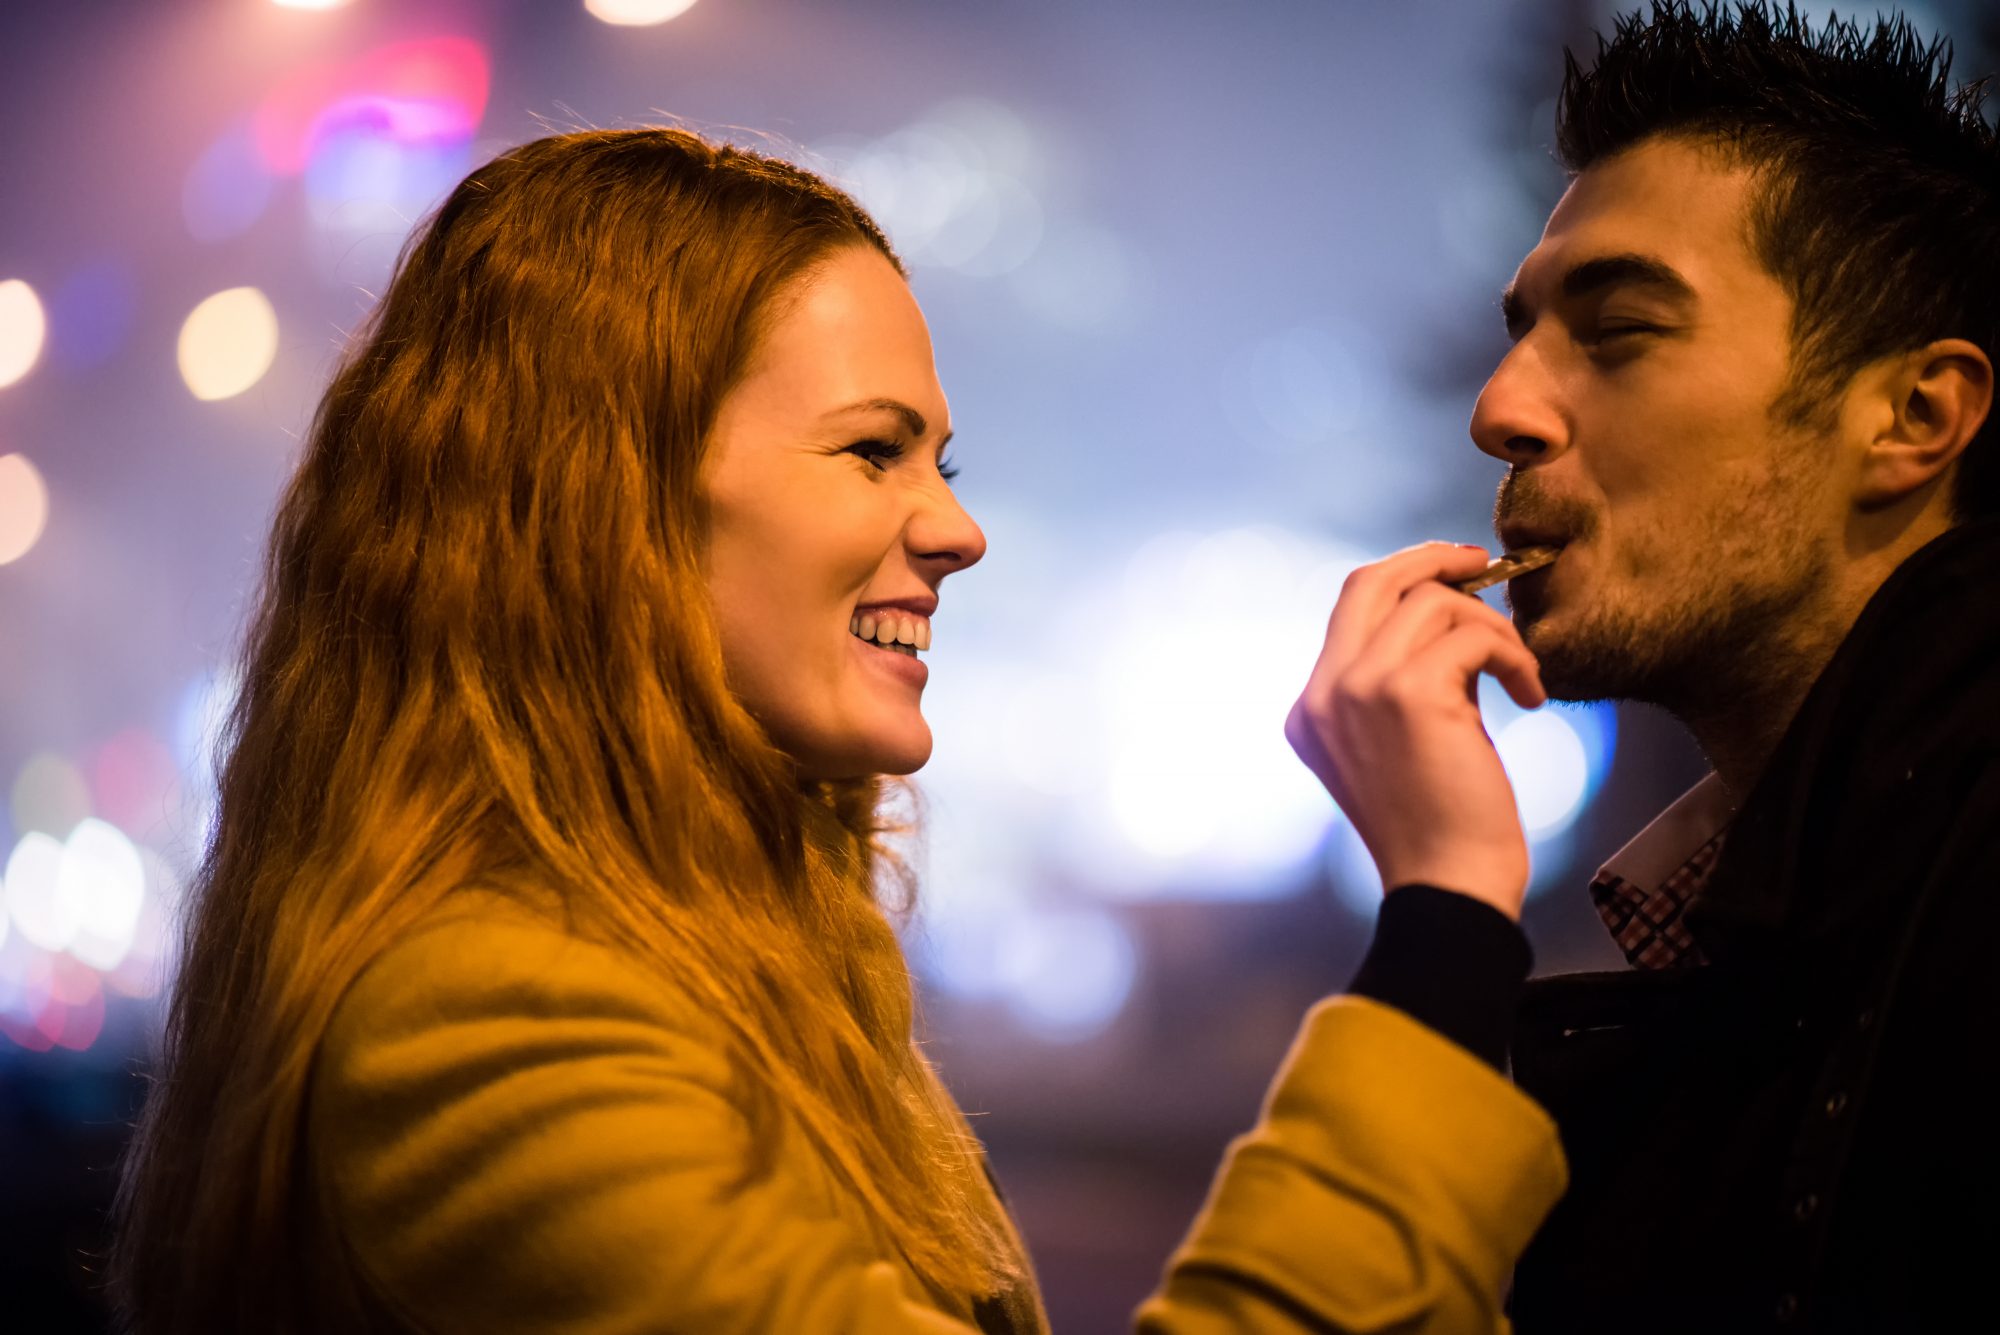 Couple on date - woman feeds her boyfriend with chocolate in street at winter night